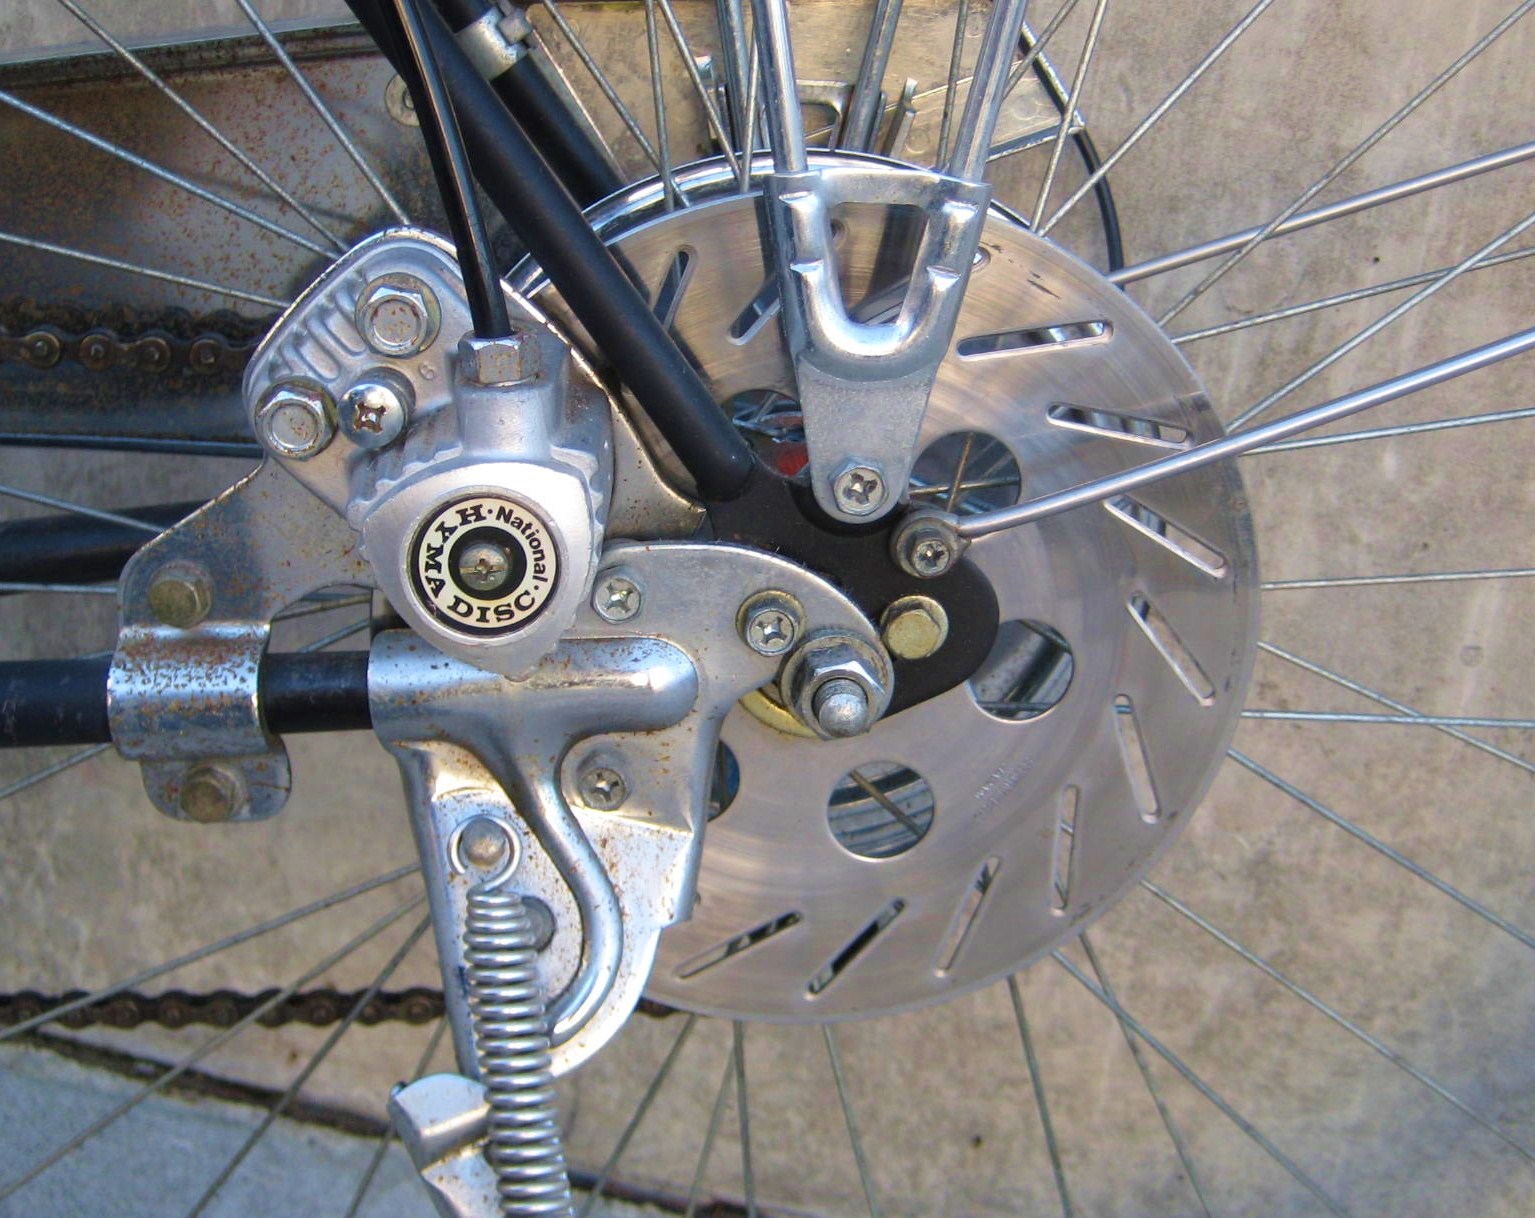 bicycle with hydraulic brakes